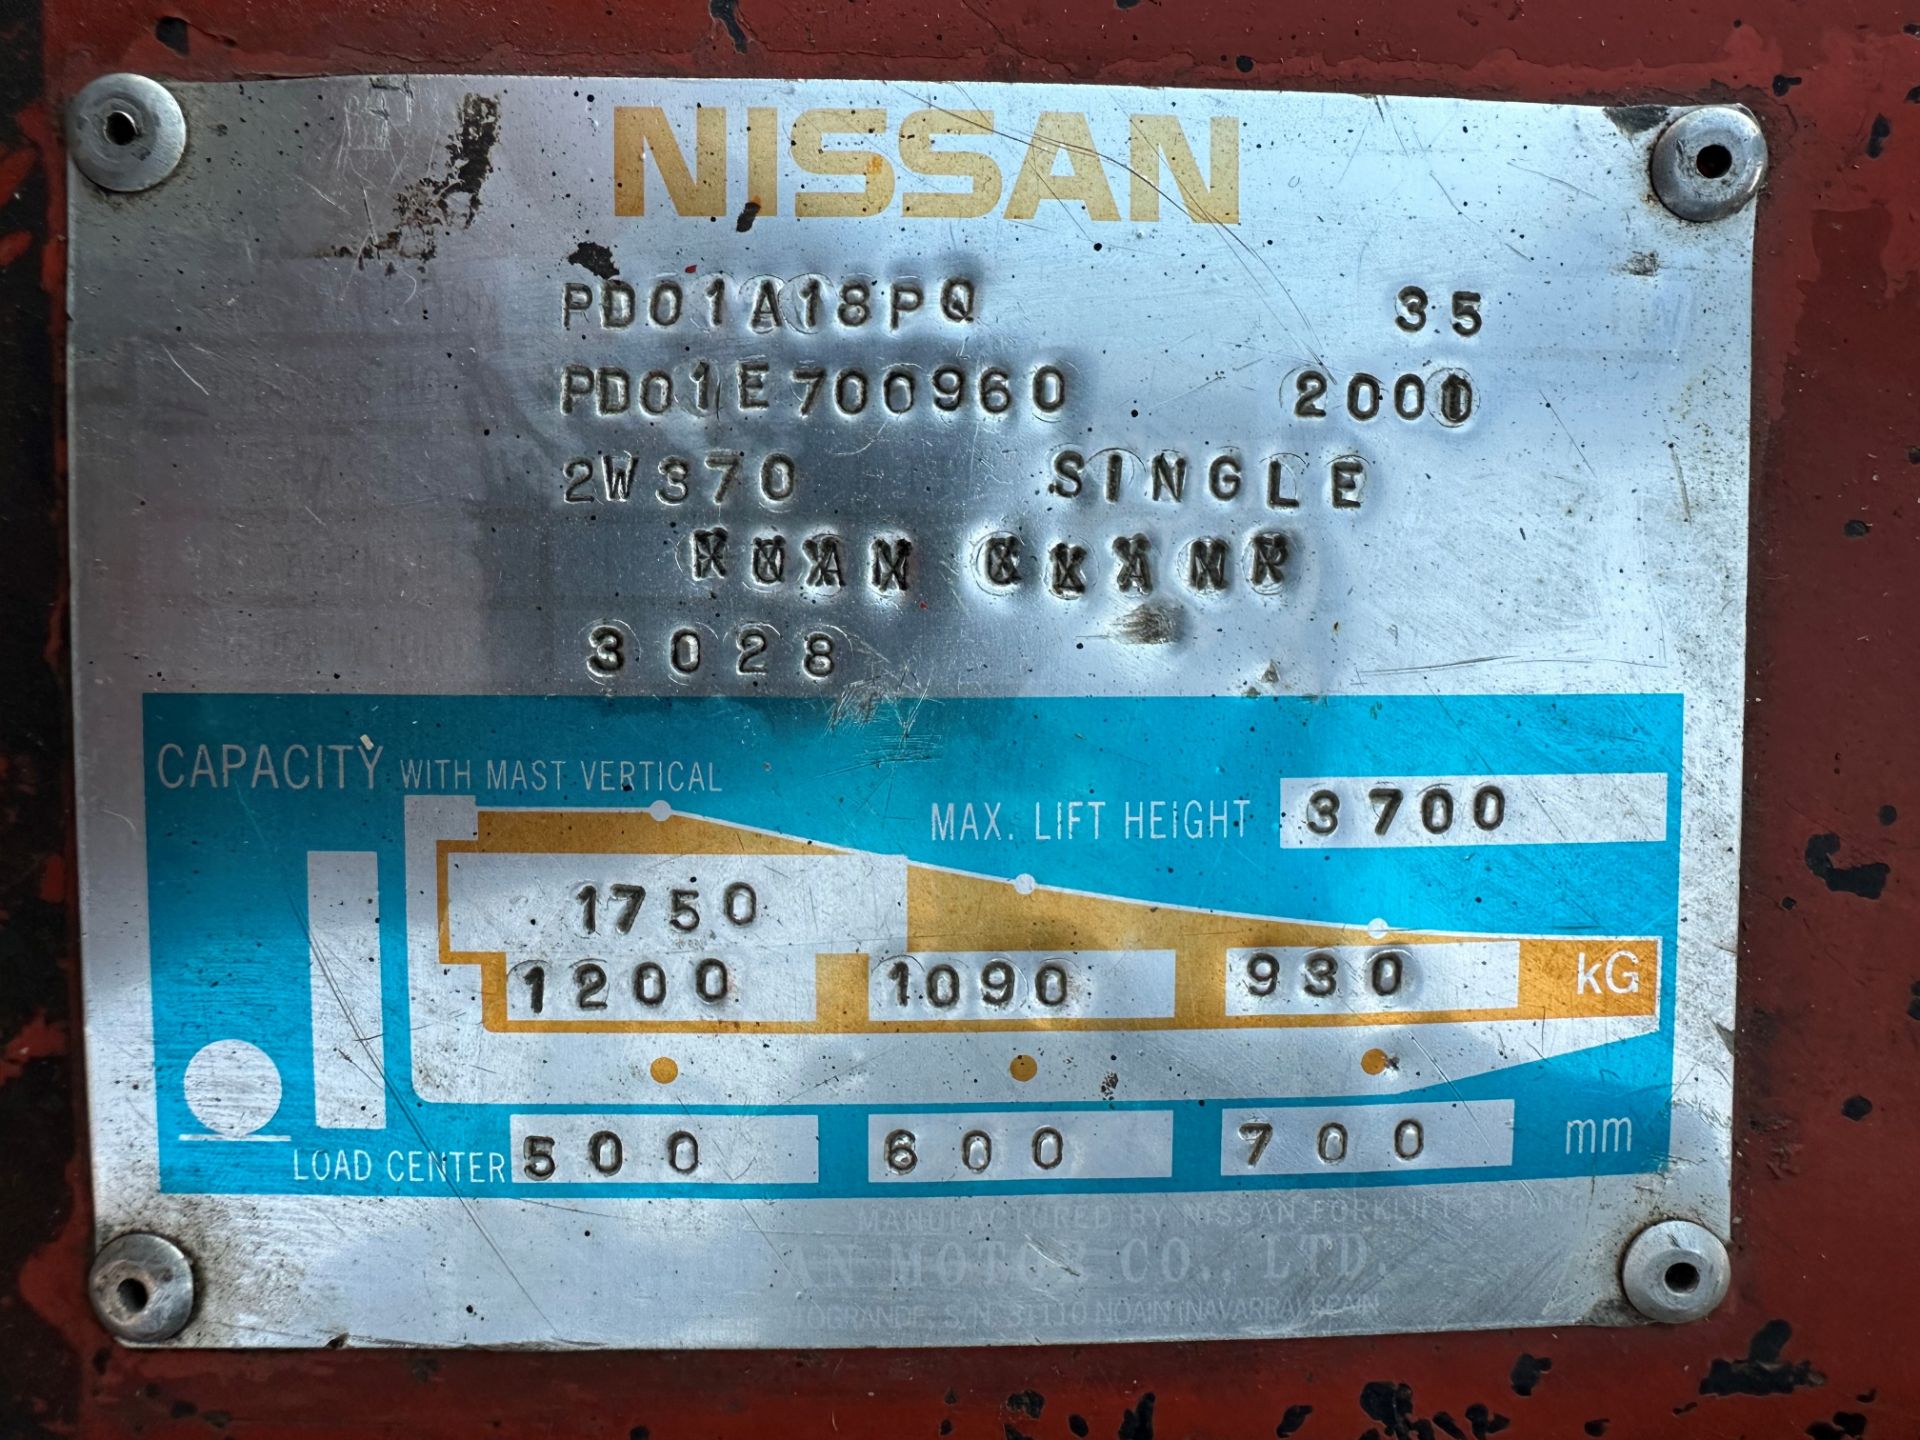 Nissan Gas Powered Fork Lift Truck - Image 9 of 9